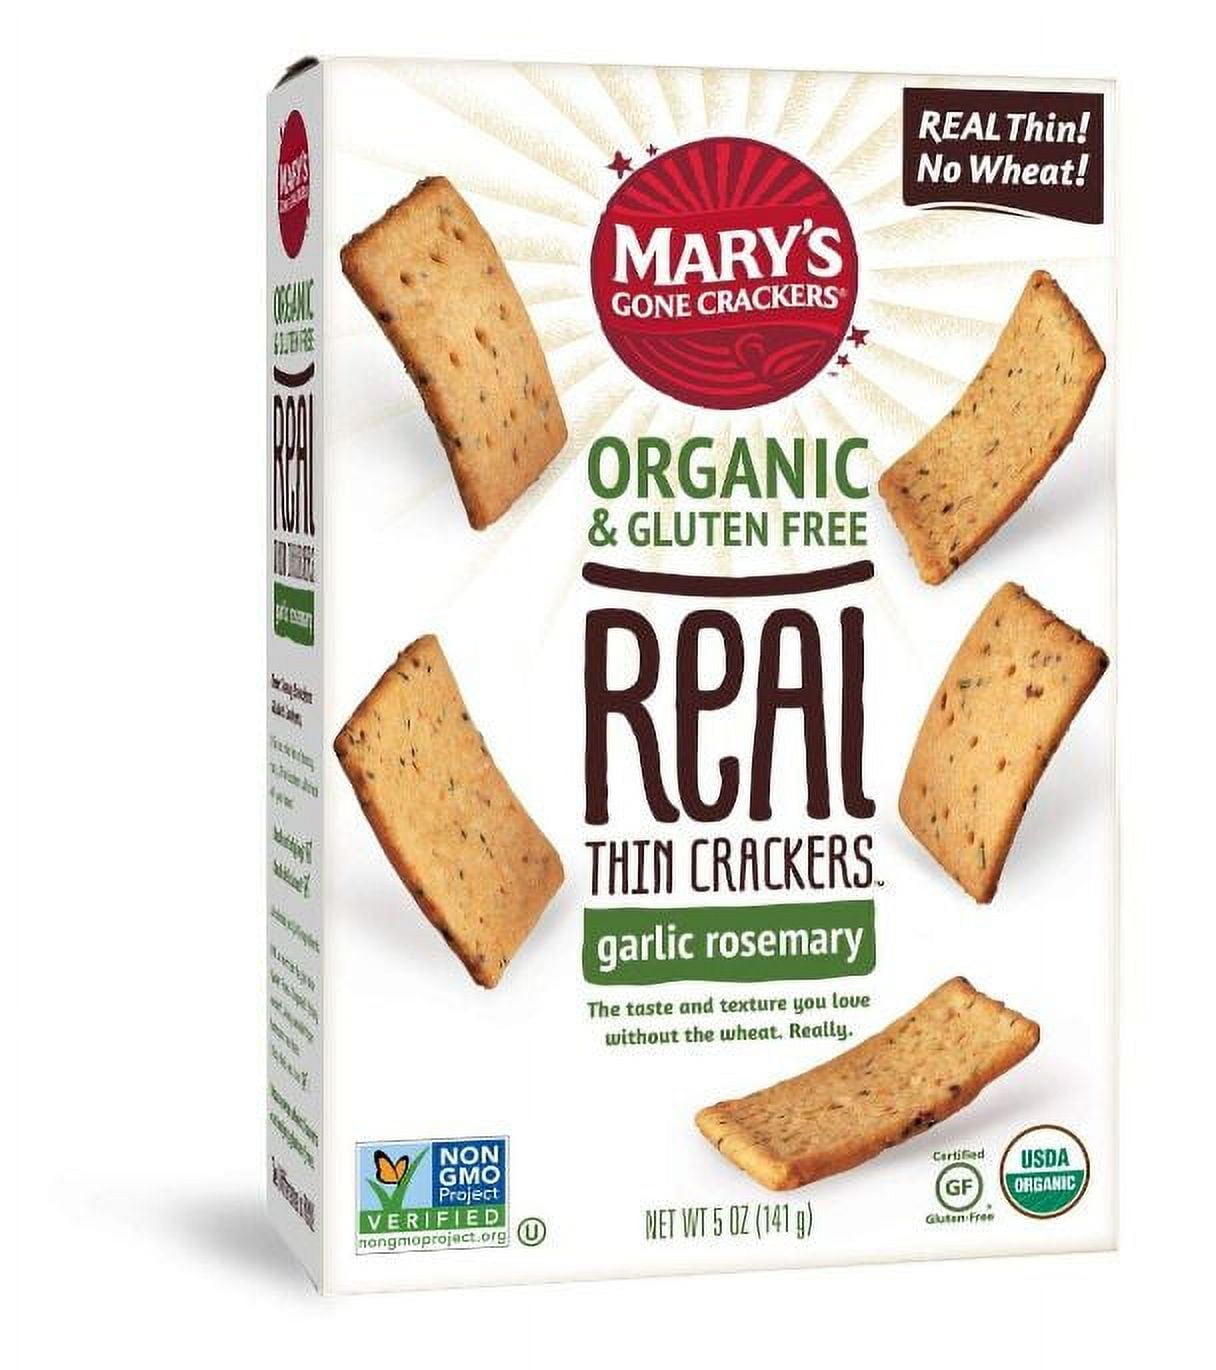 Sea Salt REAL THIN Crackers – Mary's Gone Crackers